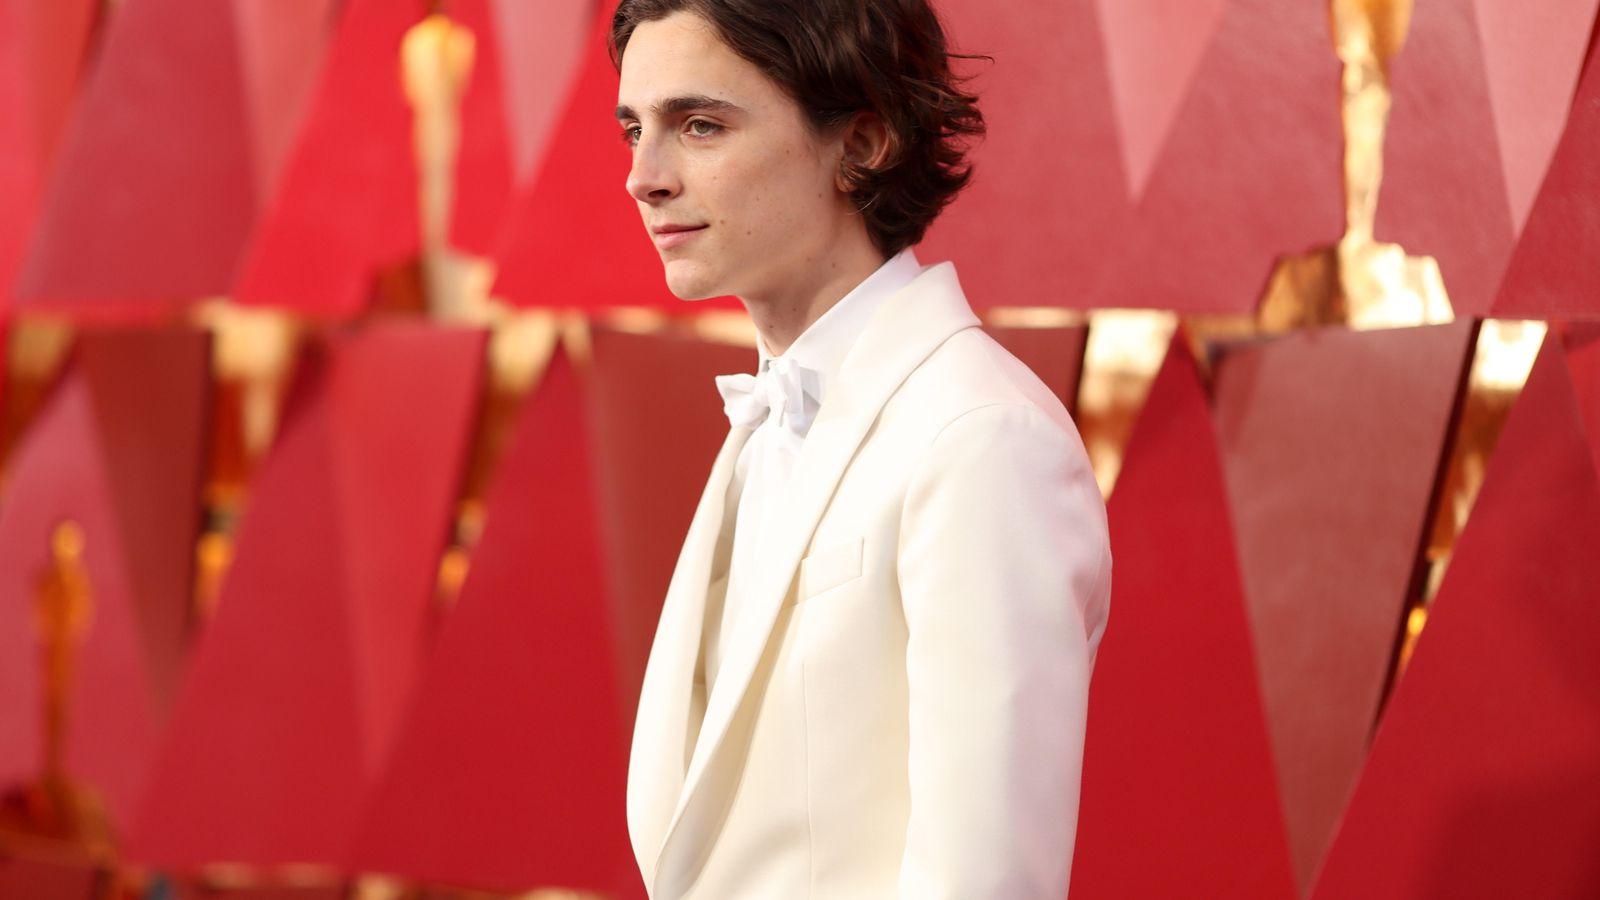 Netflix plays on Shakespeare with Timothée Chalamet in